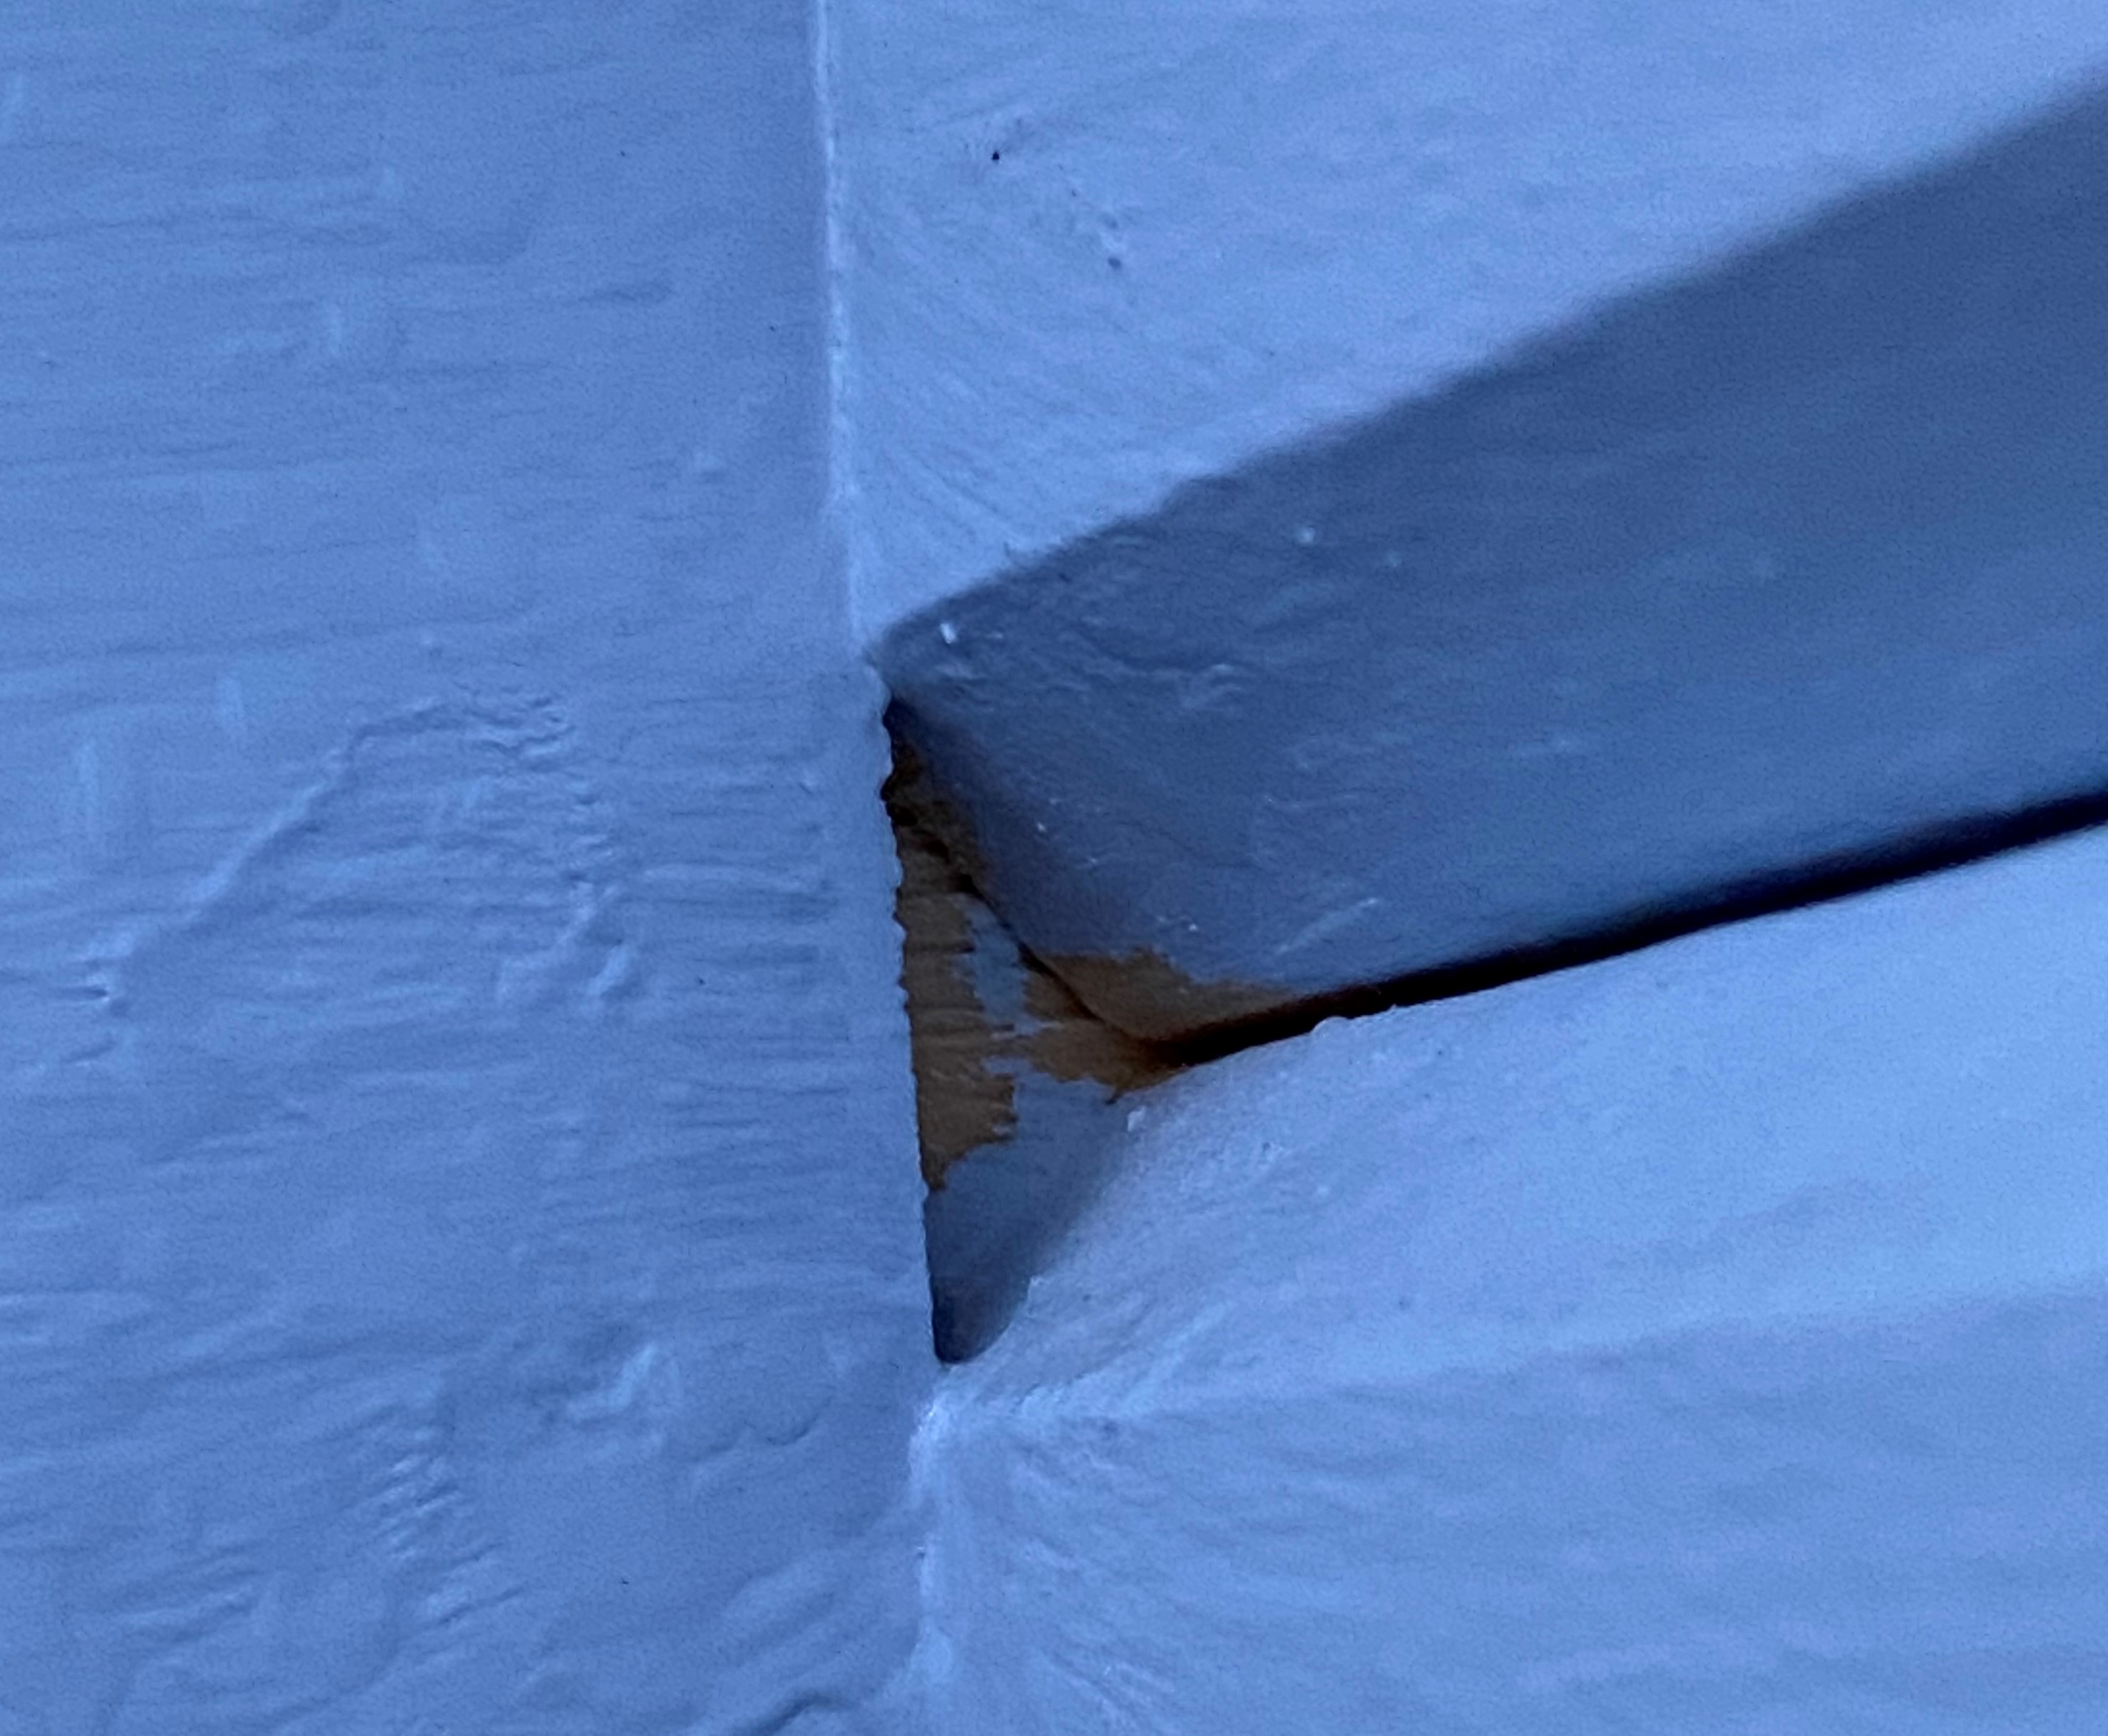 When painting make sure the paint gets into the corner joints